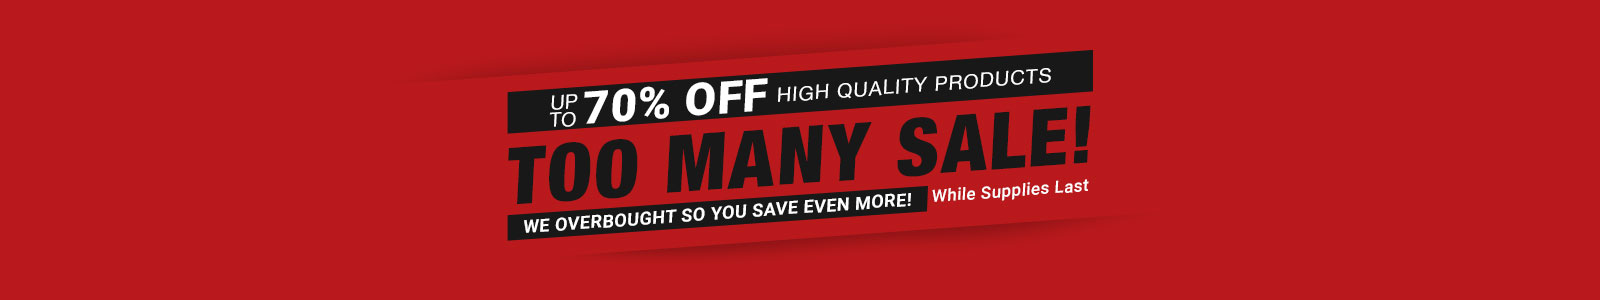 The Too Many Sale!
We overbought so you save even more! 
Up to 85% off high quality products
While Supplies Last
Shop Now